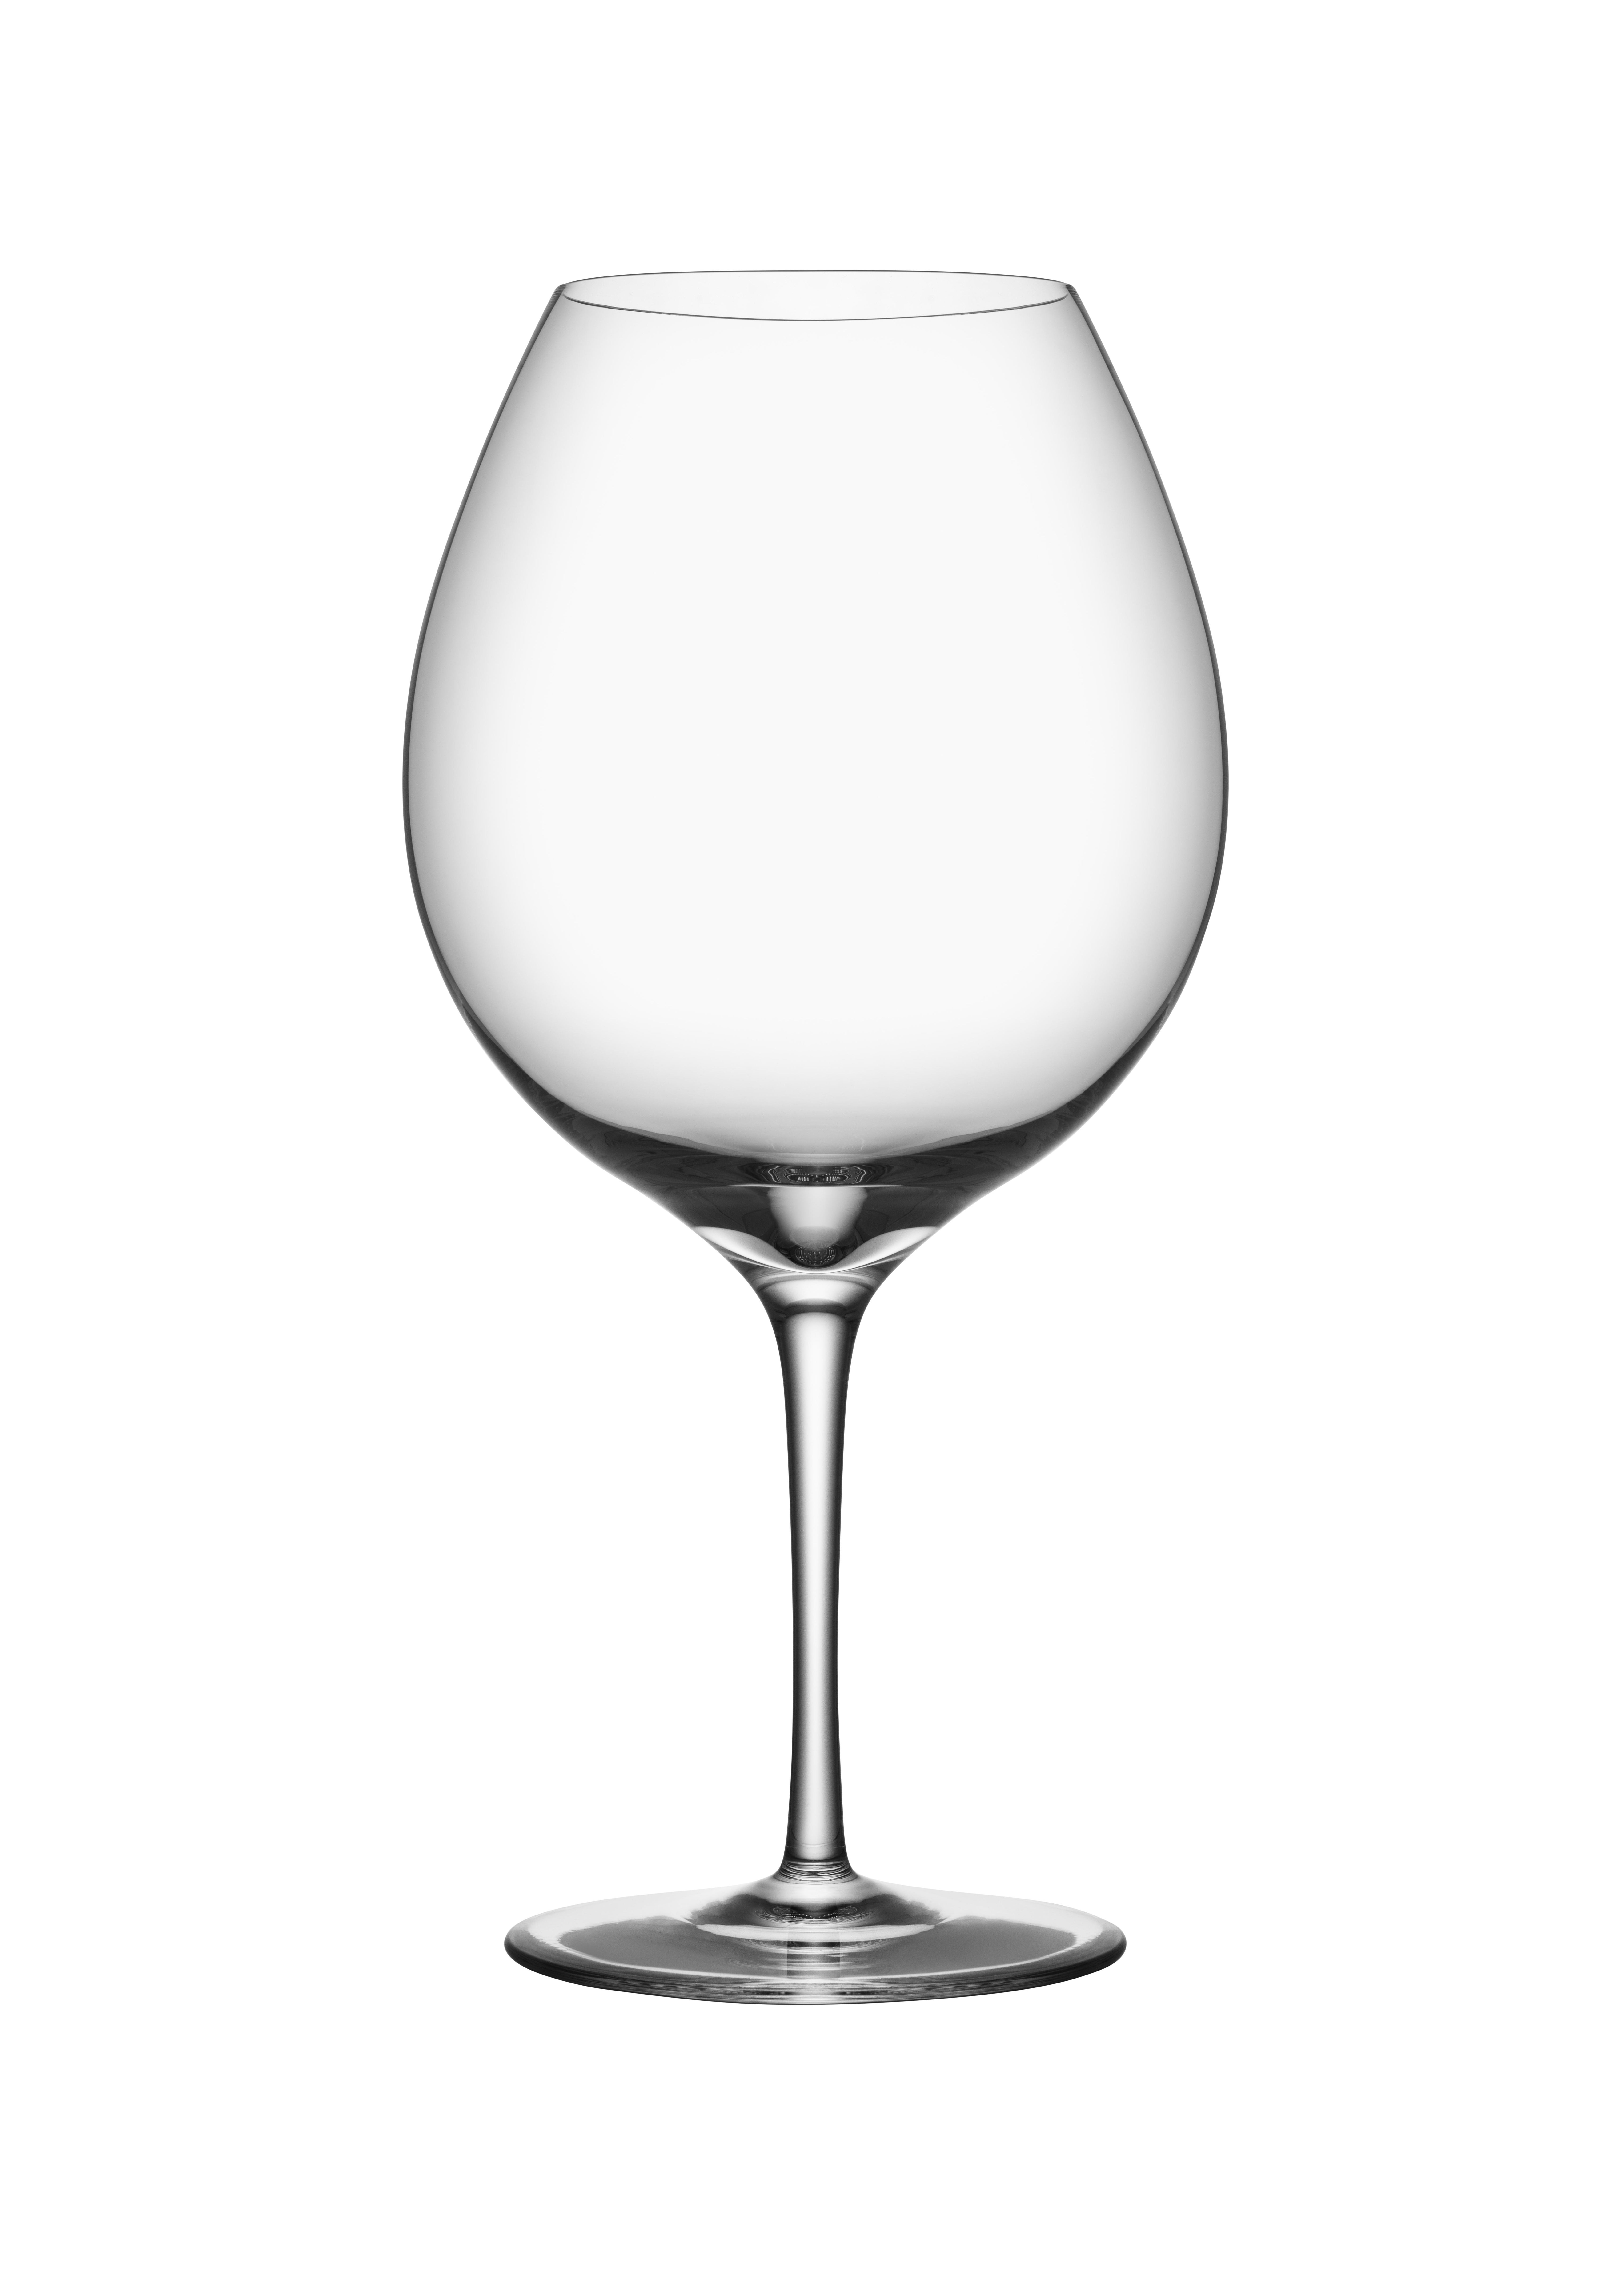 Premier Pinot Noir from Orrefors, which holds 29 oz, is designed to emphasize the flavors and aromas of varietal wines, specifically Pinot Noir. The wine glass is mouth-blown with a handmade stem and is an elegant complement to any table setting.
